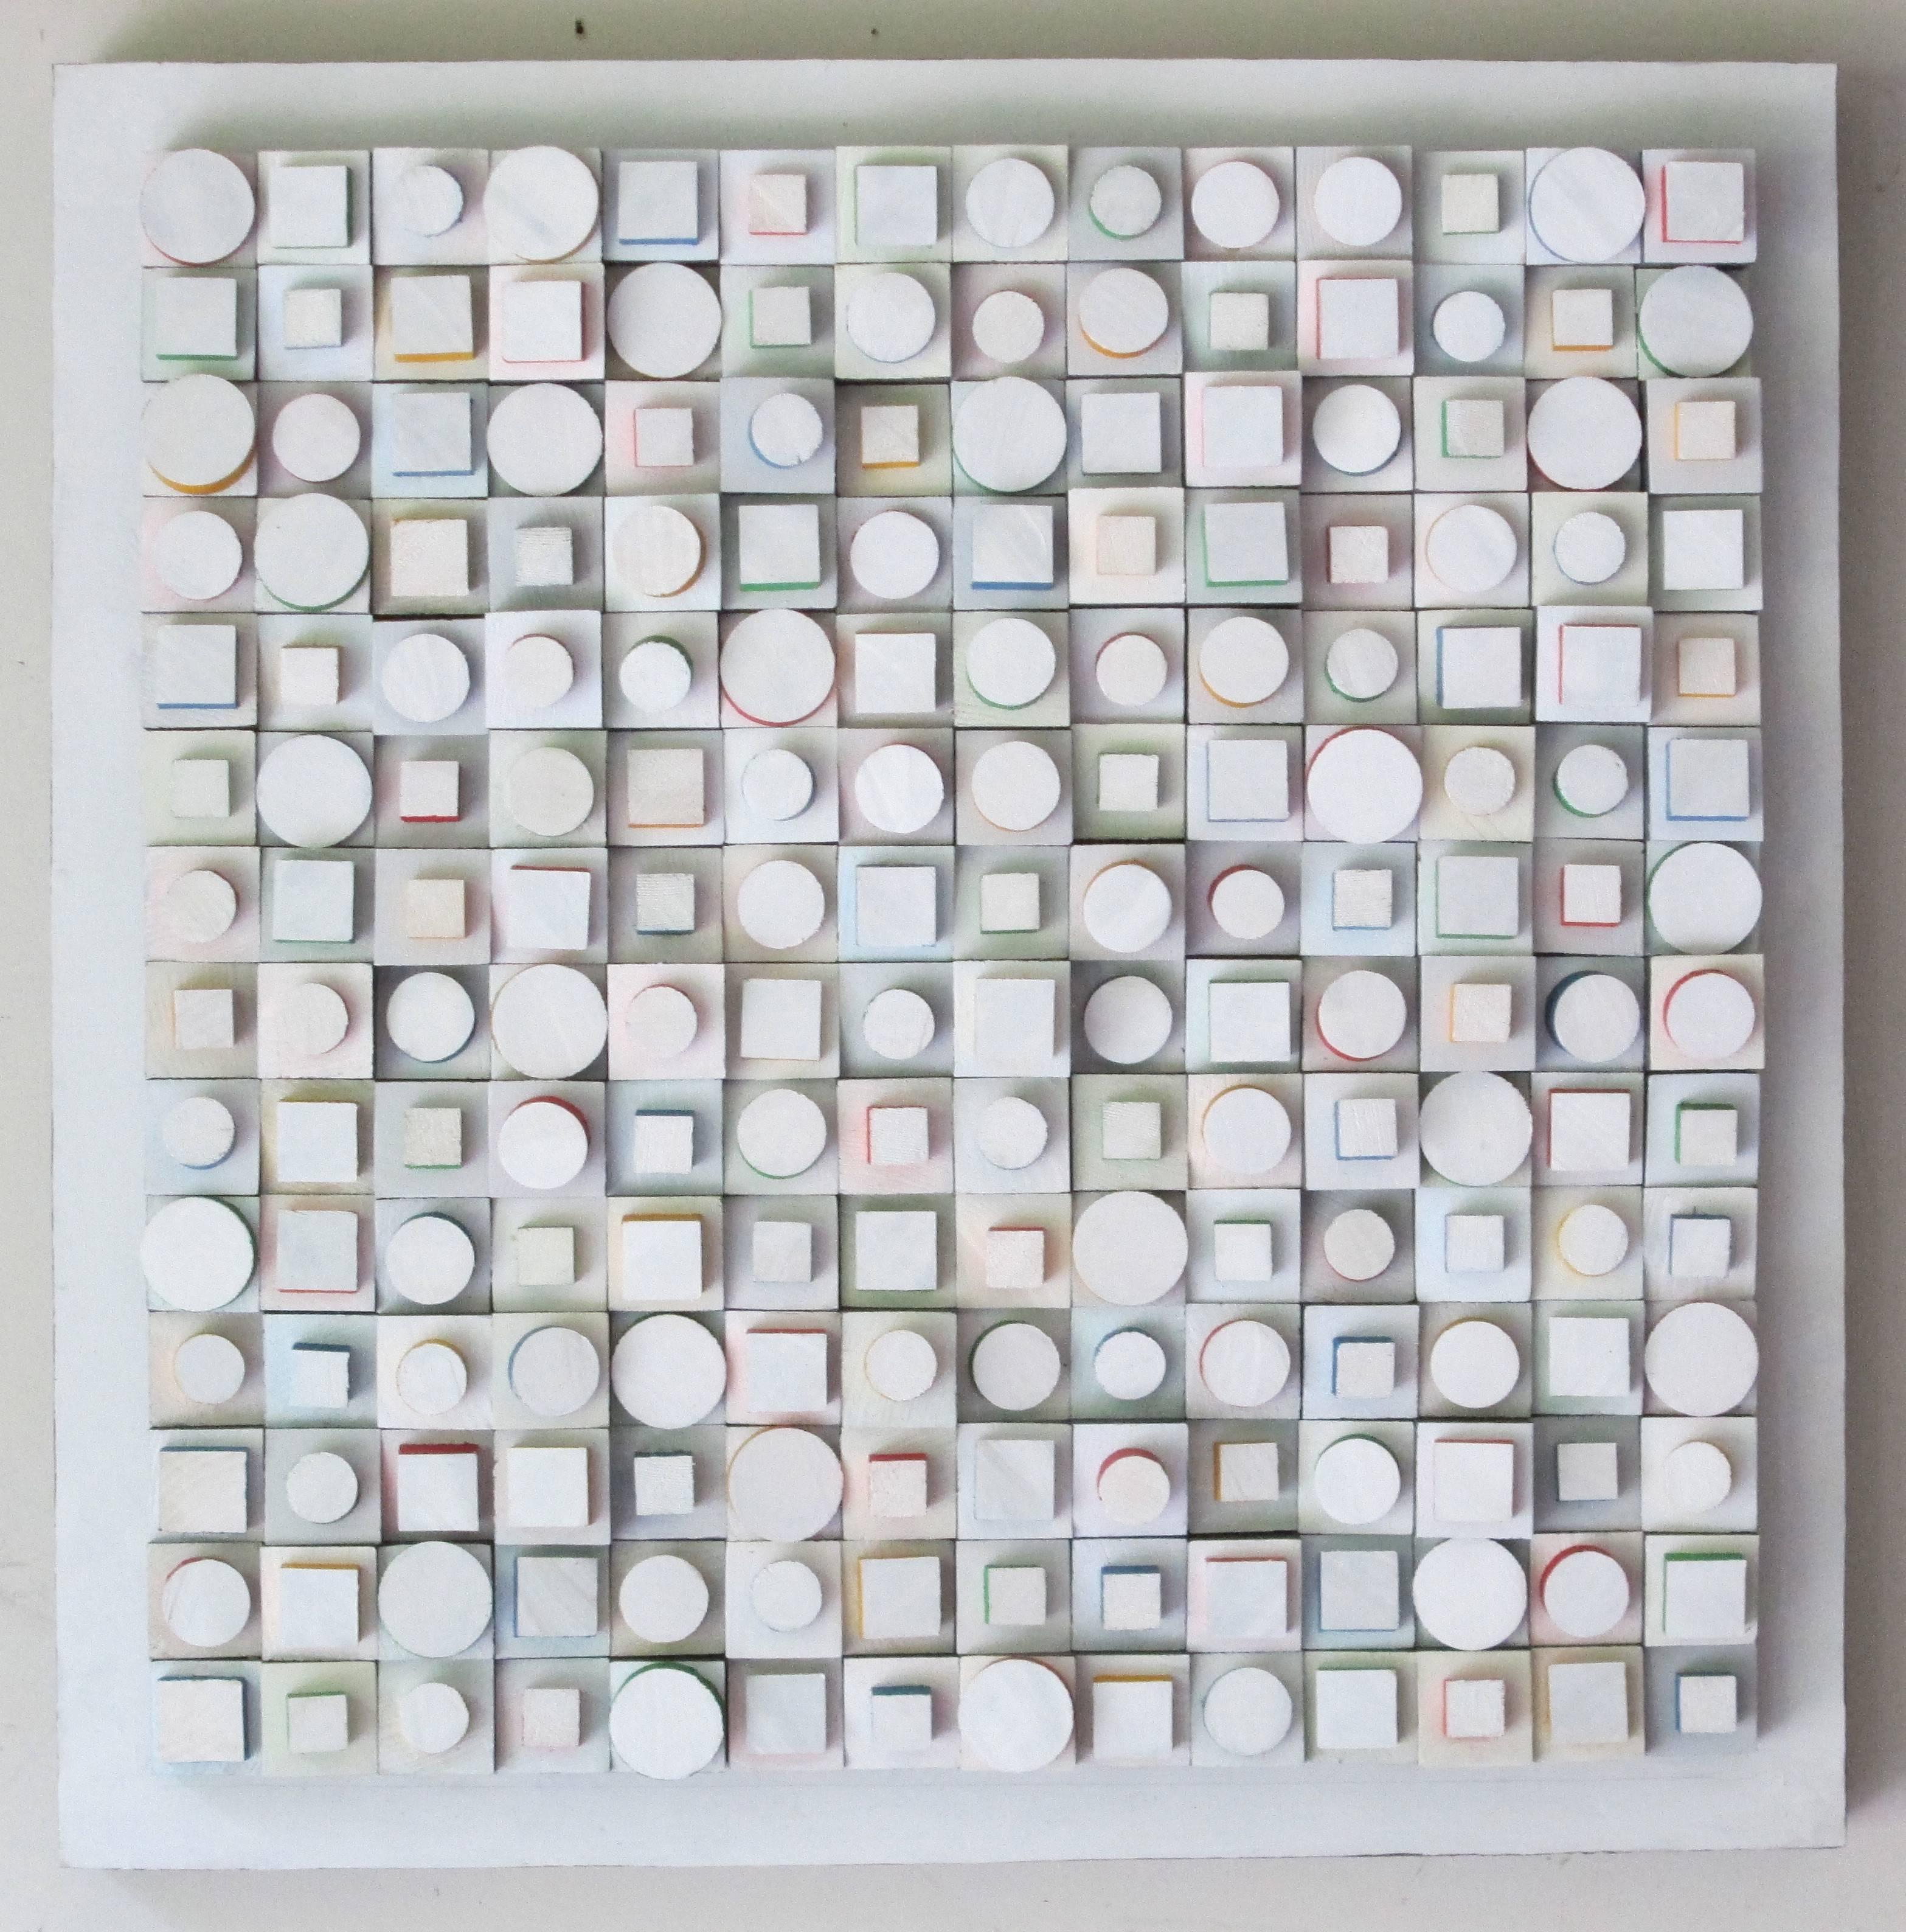 Stephen Walling Abstract Painting - Its All How You Look At It (White and Multi-Colored Abstract Wall Sculpture)